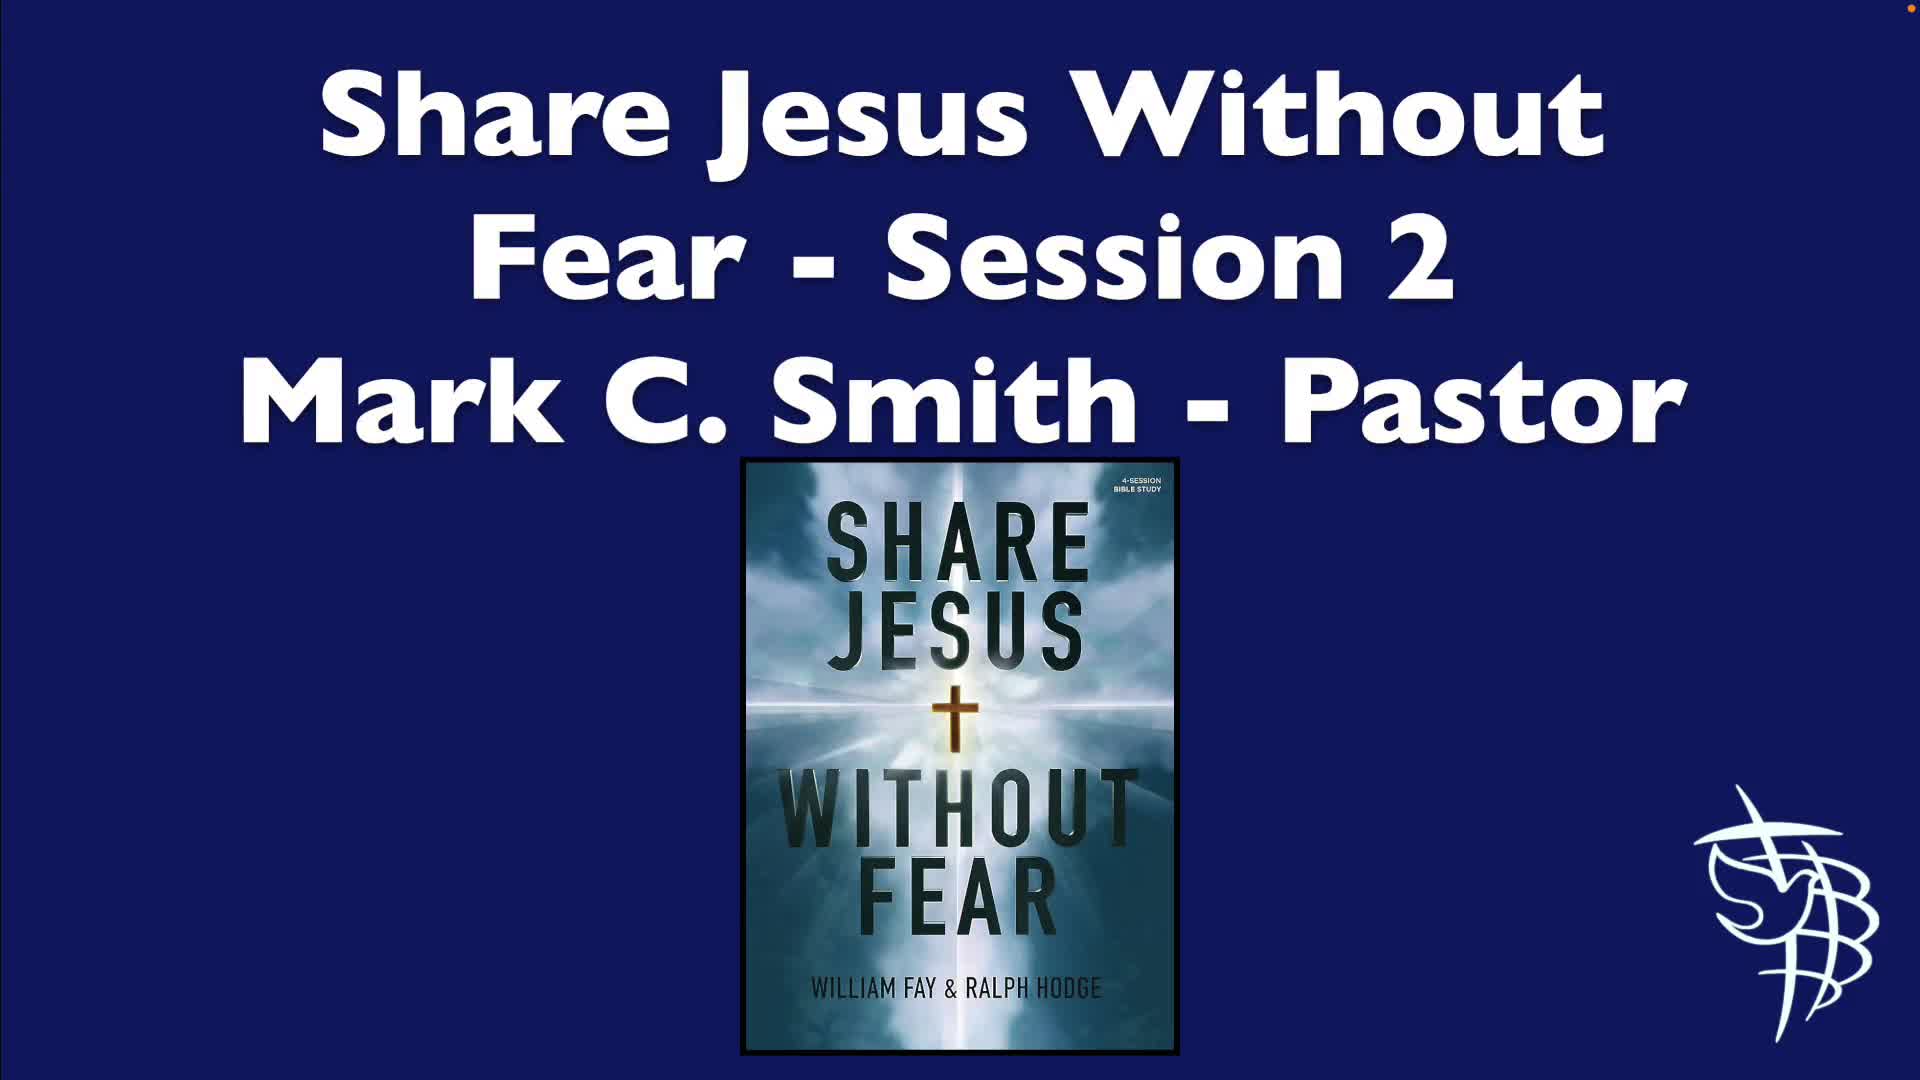 Share Jesus Without Fear  Session 2